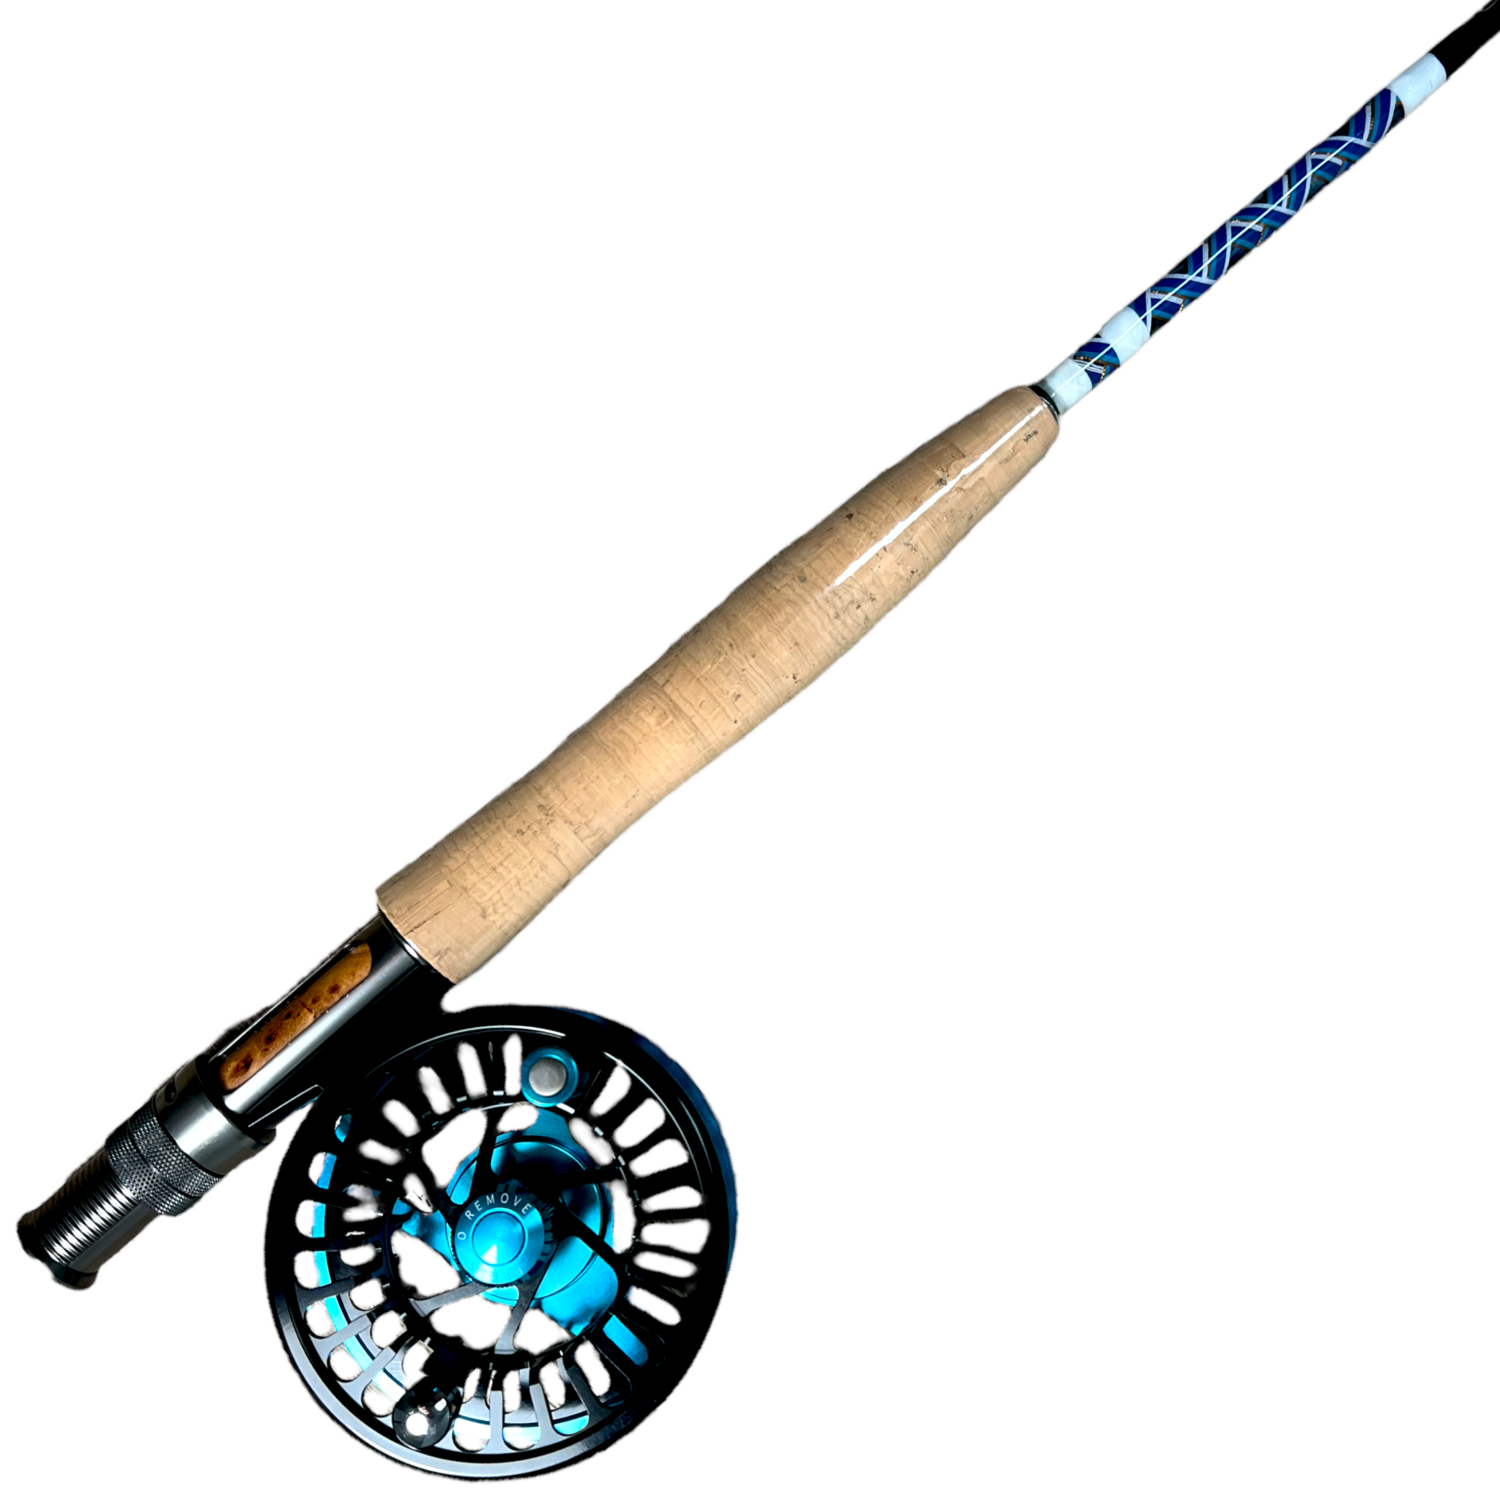 Custom Fly Rod and Reel Combo
8'6" | 4 wt. | Fast Action | 4 pc.